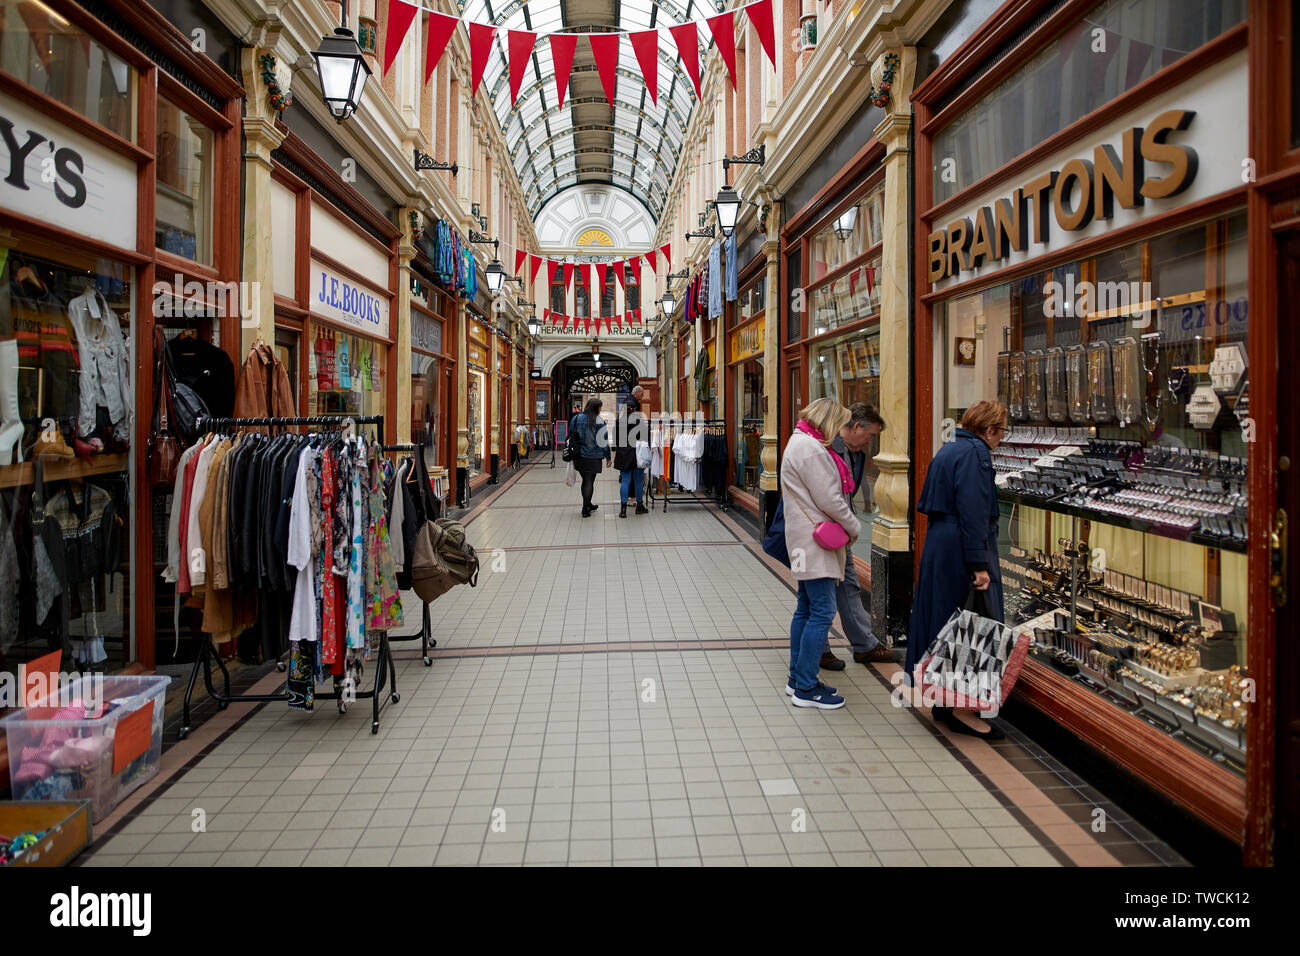 Kingston upon Hull, Hepworth Arcade victorian indoor shopping arcade Brantons Jewellers in the Old Town Stock Photo